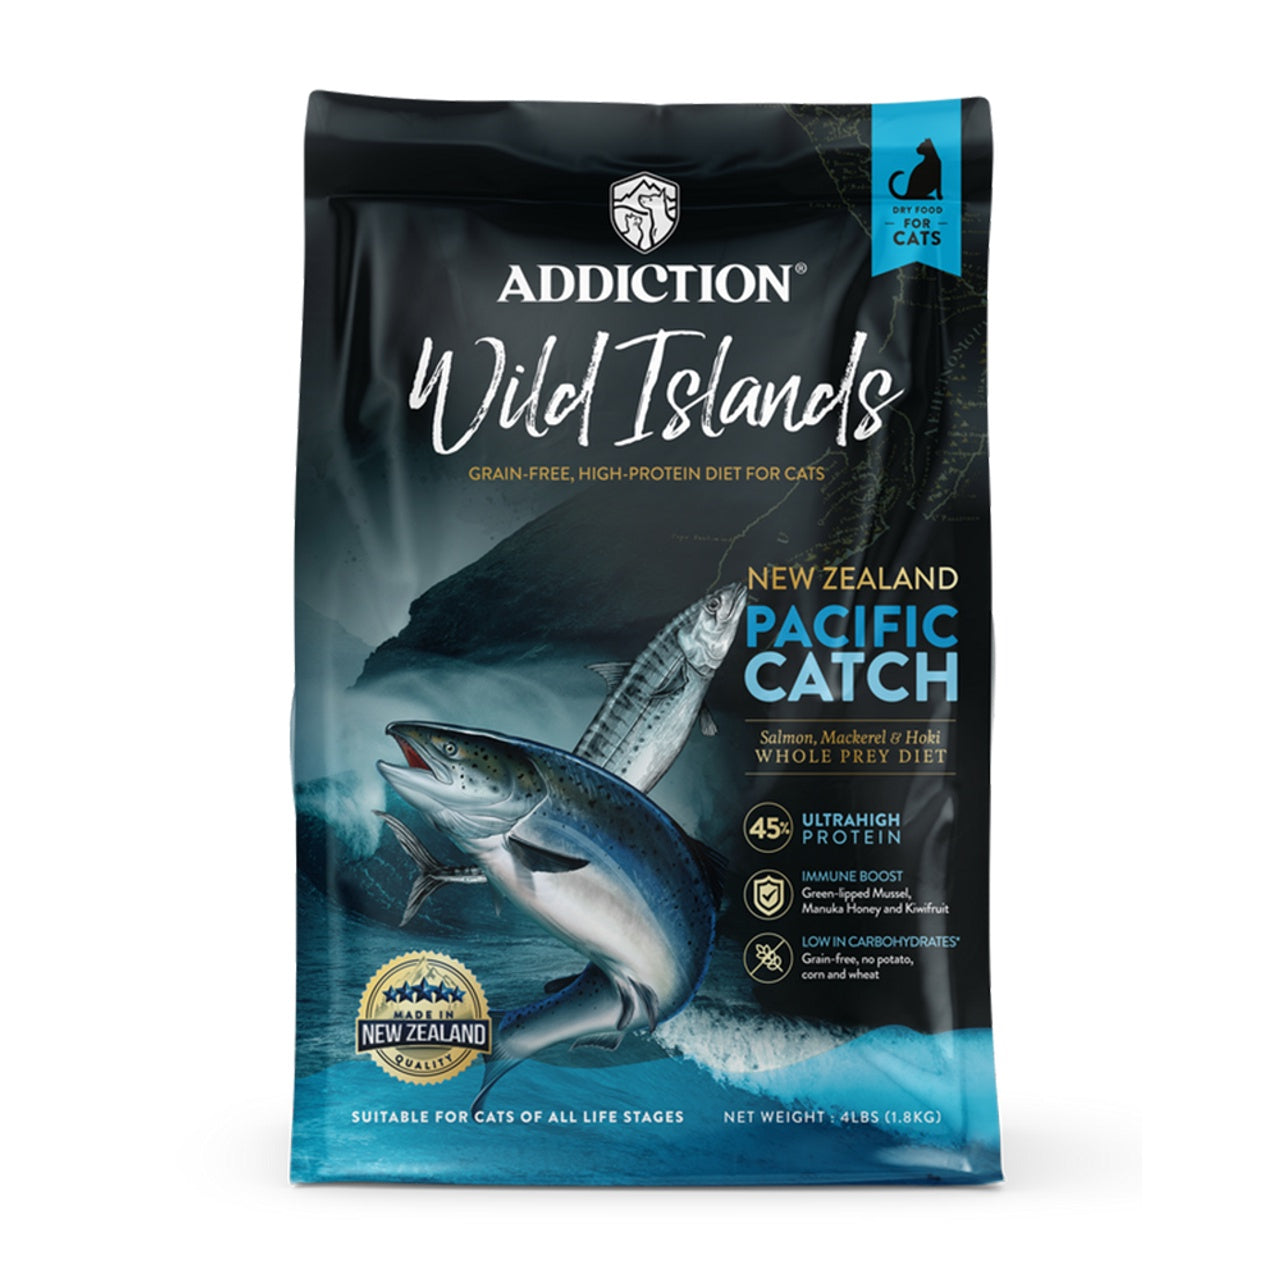 Addiction Biscuits Addiction Wild Islands - Pacific Catch Cat Food 1.8kg